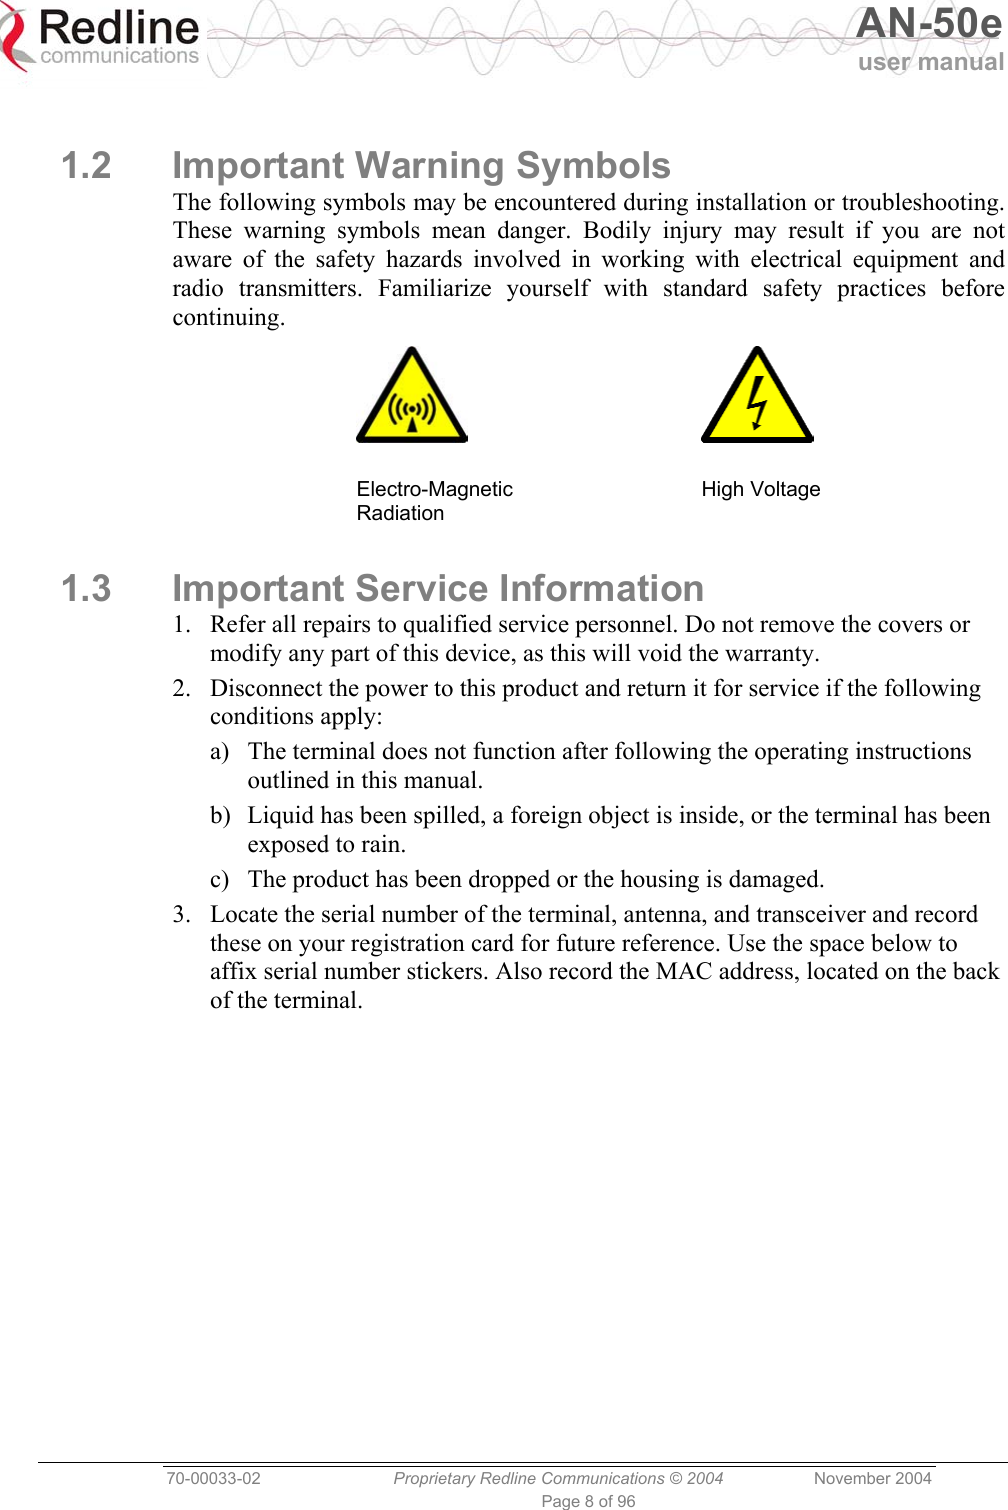   AN-50e user manual  70-00033-02  Proprietary Redline Communications © 2004 November 2004 Page 8 of 96  1.2 Important Warning Symbols The following symbols may be encountered during installation or troubleshooting. These warning symbols mean danger. Bodily injury may result if you are not aware of the safety hazards involved in working with electrical equipment and radio transmitters. Familiarize yourself with standard safety practices before continuing.      Electro-Magnetic Radiation  High Voltage 1.3  Important Service Information 1.  Refer all repairs to qualified service personnel. Do not remove the covers or modify any part of this device, as this will void the warranty. 2.  Disconnect the power to this product and return it for service if the following conditions apply: a)  The terminal does not function after following the operating instructions outlined in this manual. b)  Liquid has been spilled, a foreign object is inside, or the terminal has been exposed to rain. c)  The product has been dropped or the housing is damaged. 3.  Locate the serial number of the terminal, antenna, and transceiver and record these on your registration card for future reference. Use the space below to affix serial number stickers. Also record the MAC address, located on the back of the terminal. 